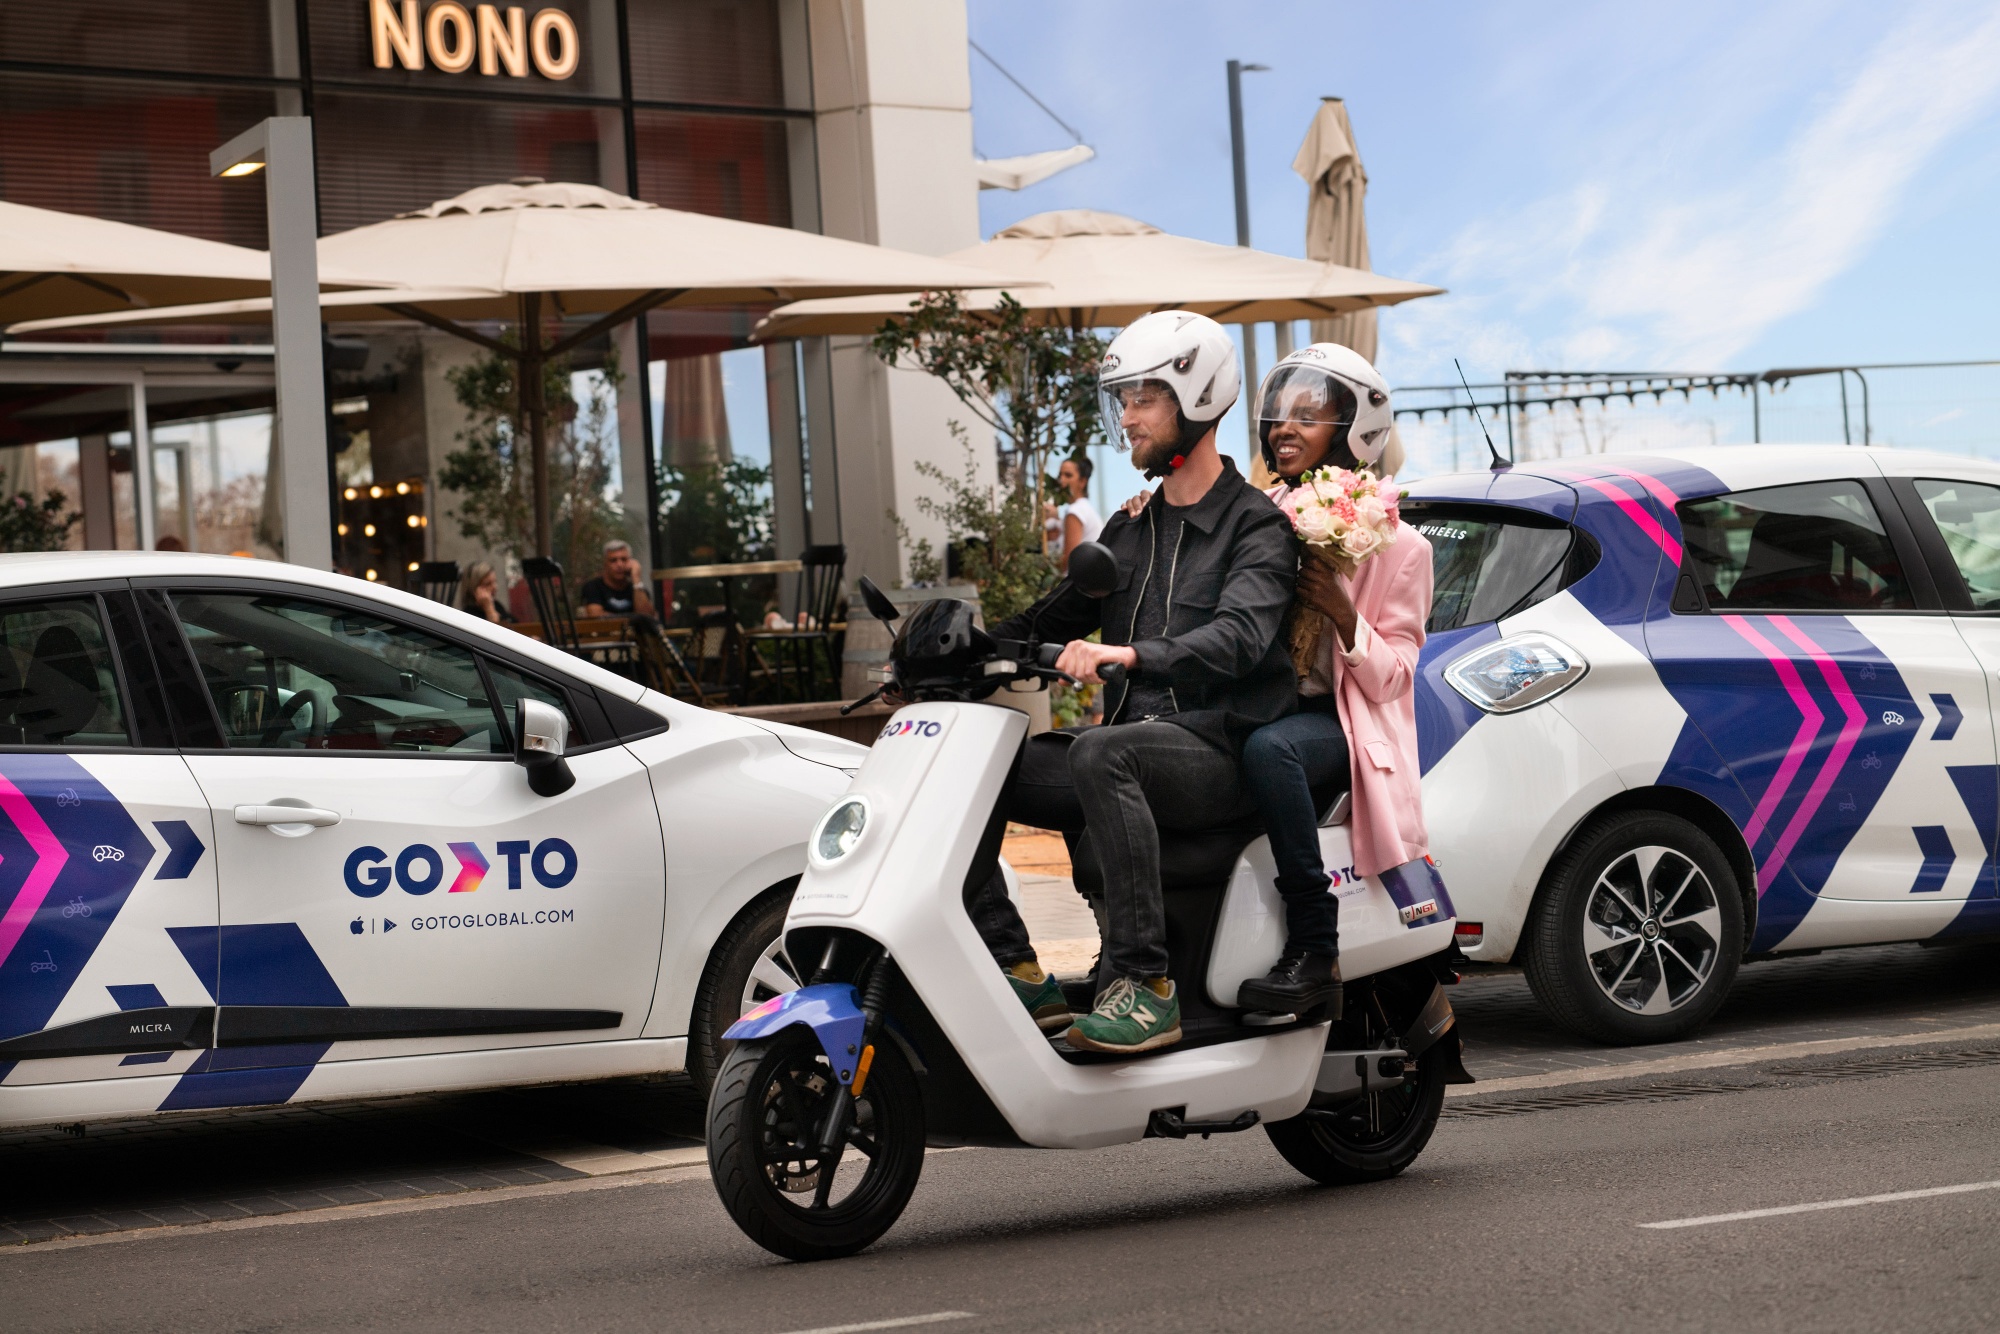 The GoTo app enables users to book cars, vans, mopeds, scooters and bikes.